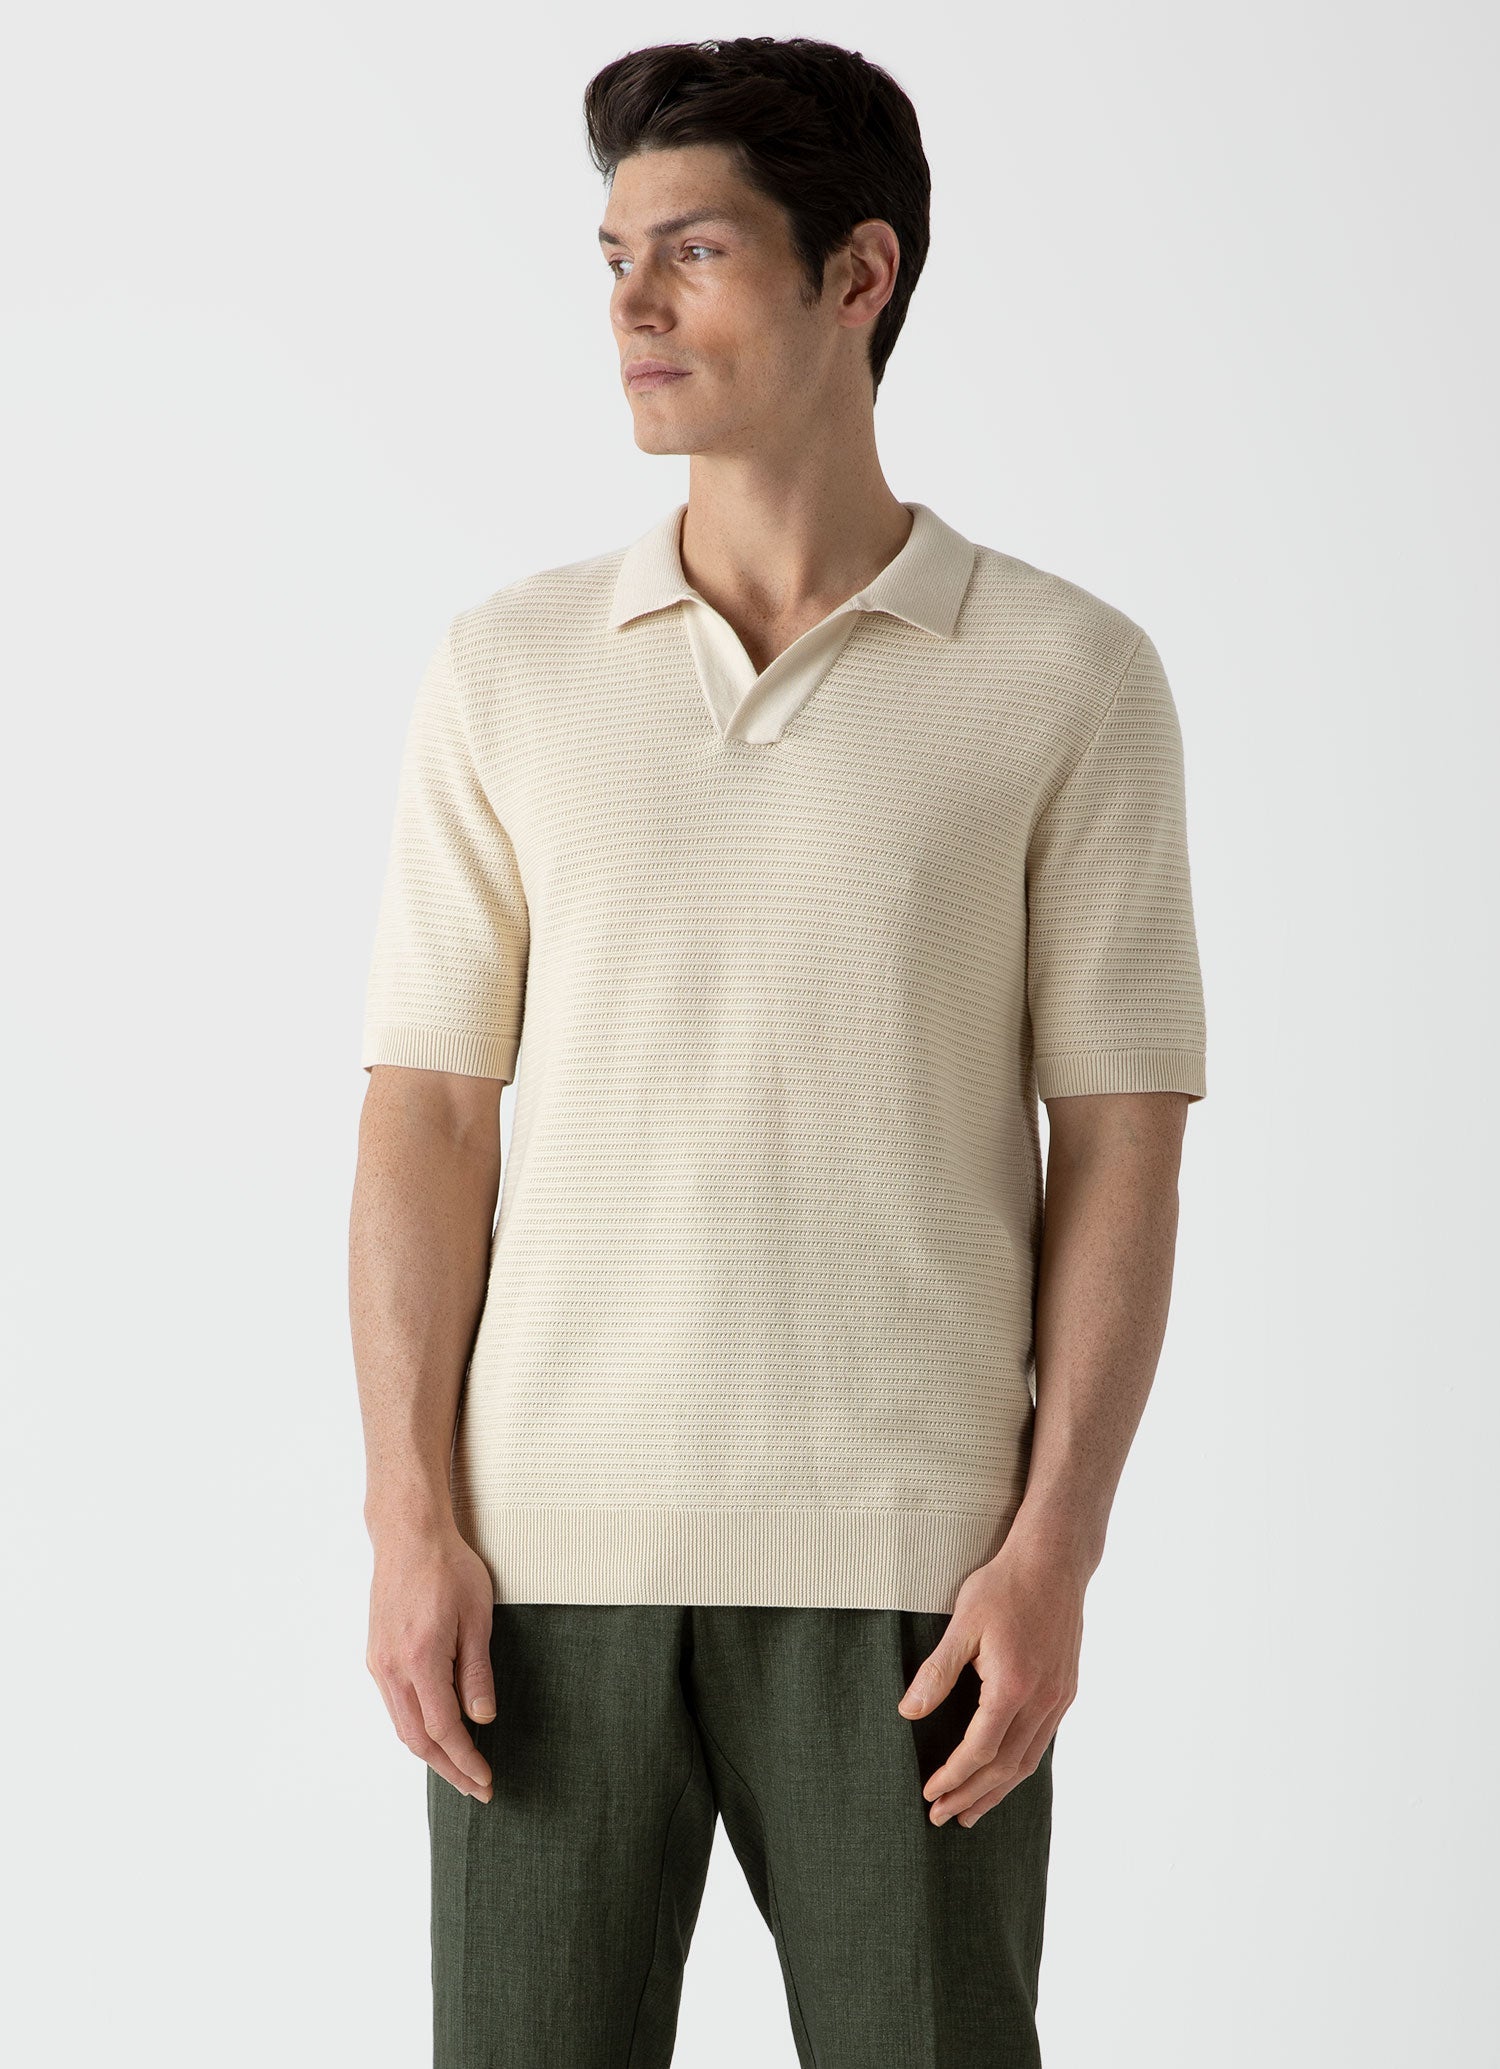 Men's Knitted Polo Shirts | Sunspel